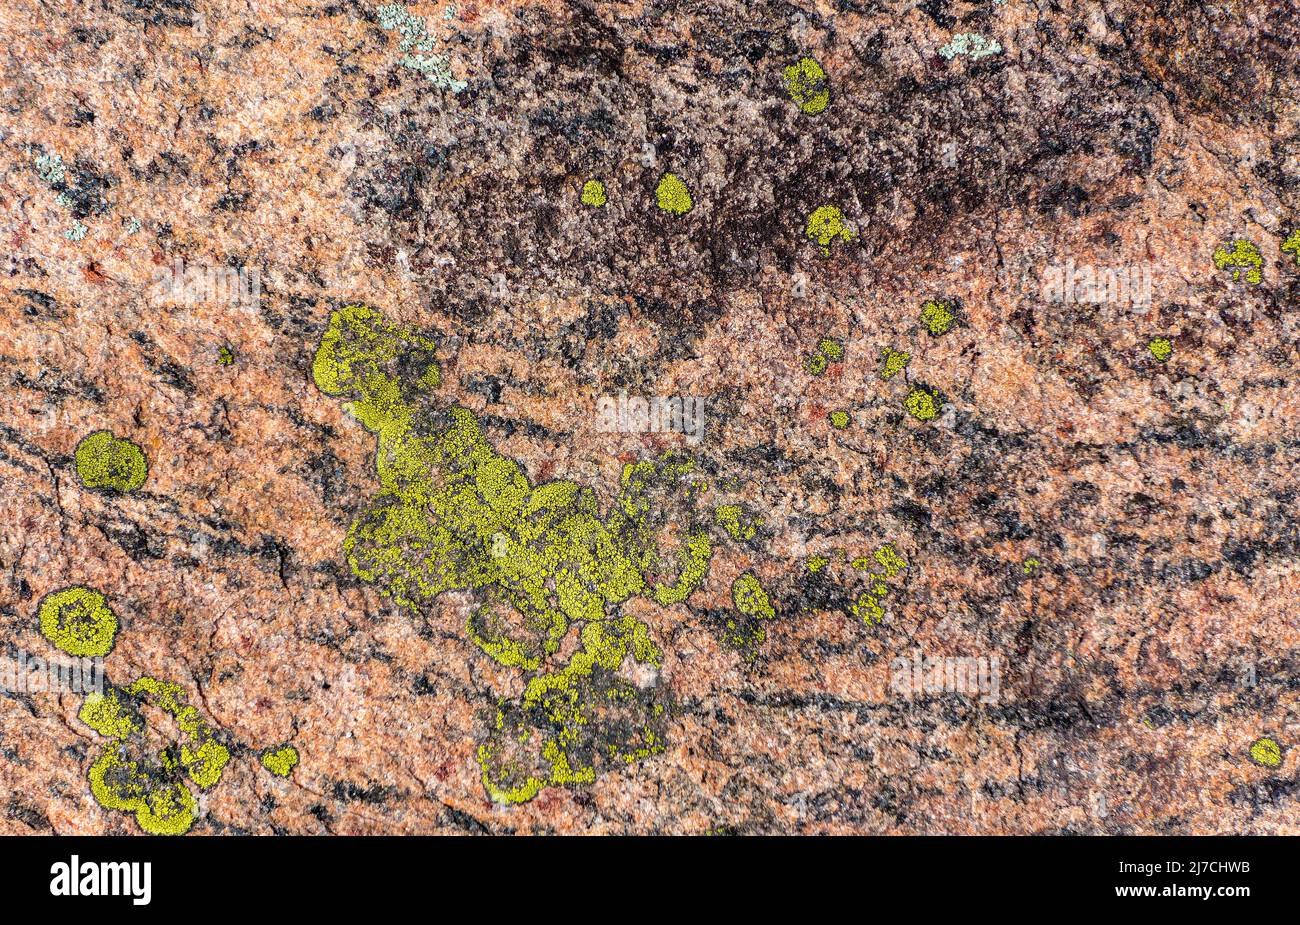 New growth of green lichen creates interesting patterns on the pink granite in the Muskoka Lakes District of Ontario Canada. Stock Photo